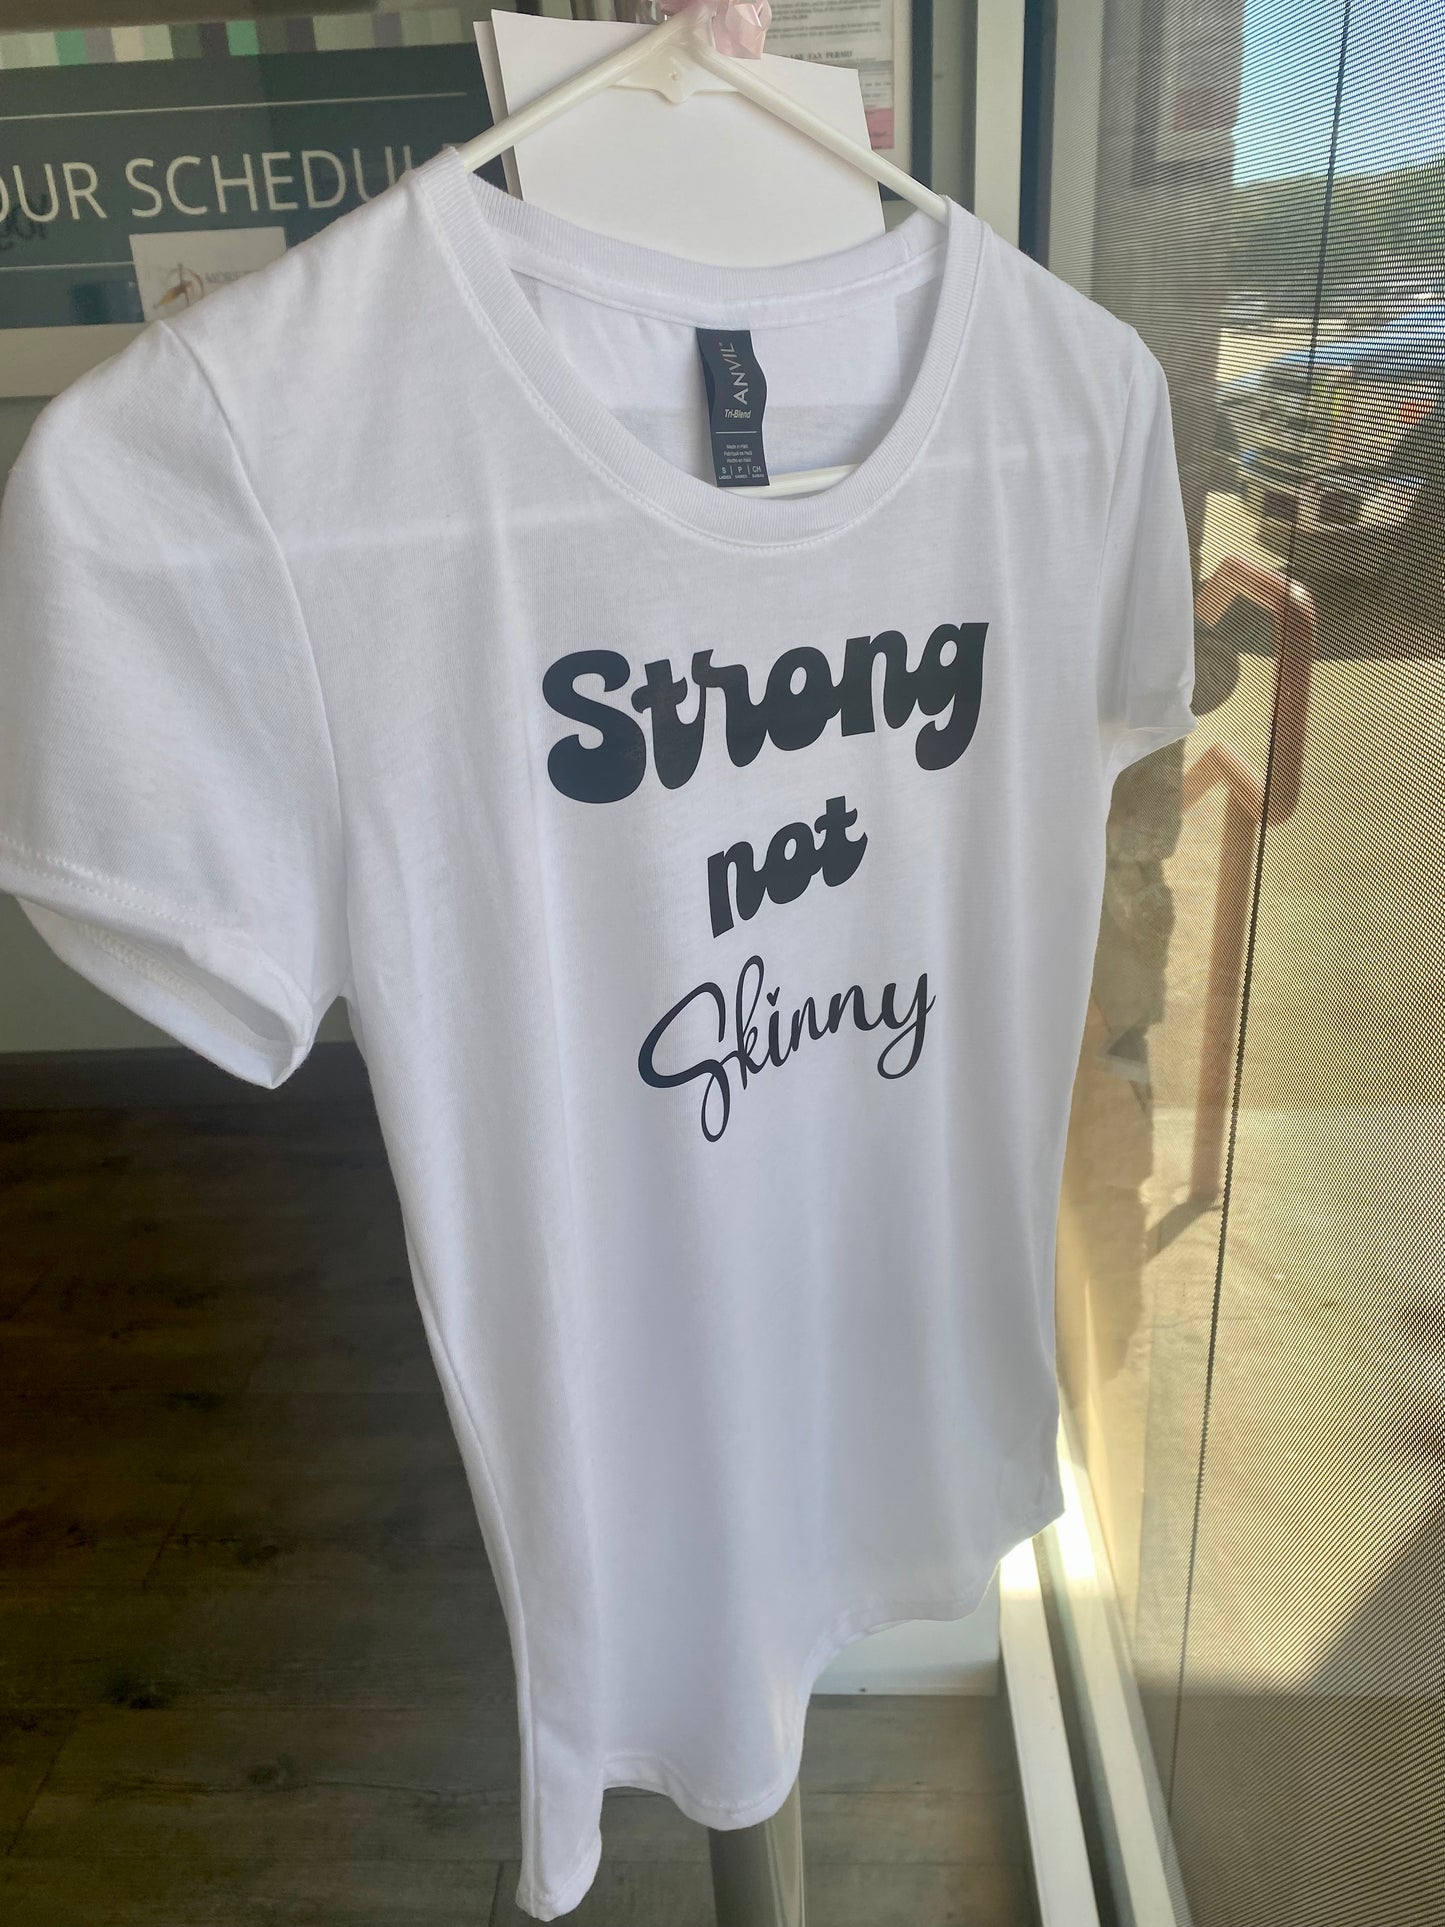 Strong not skinny graphic T-shirt - two left!